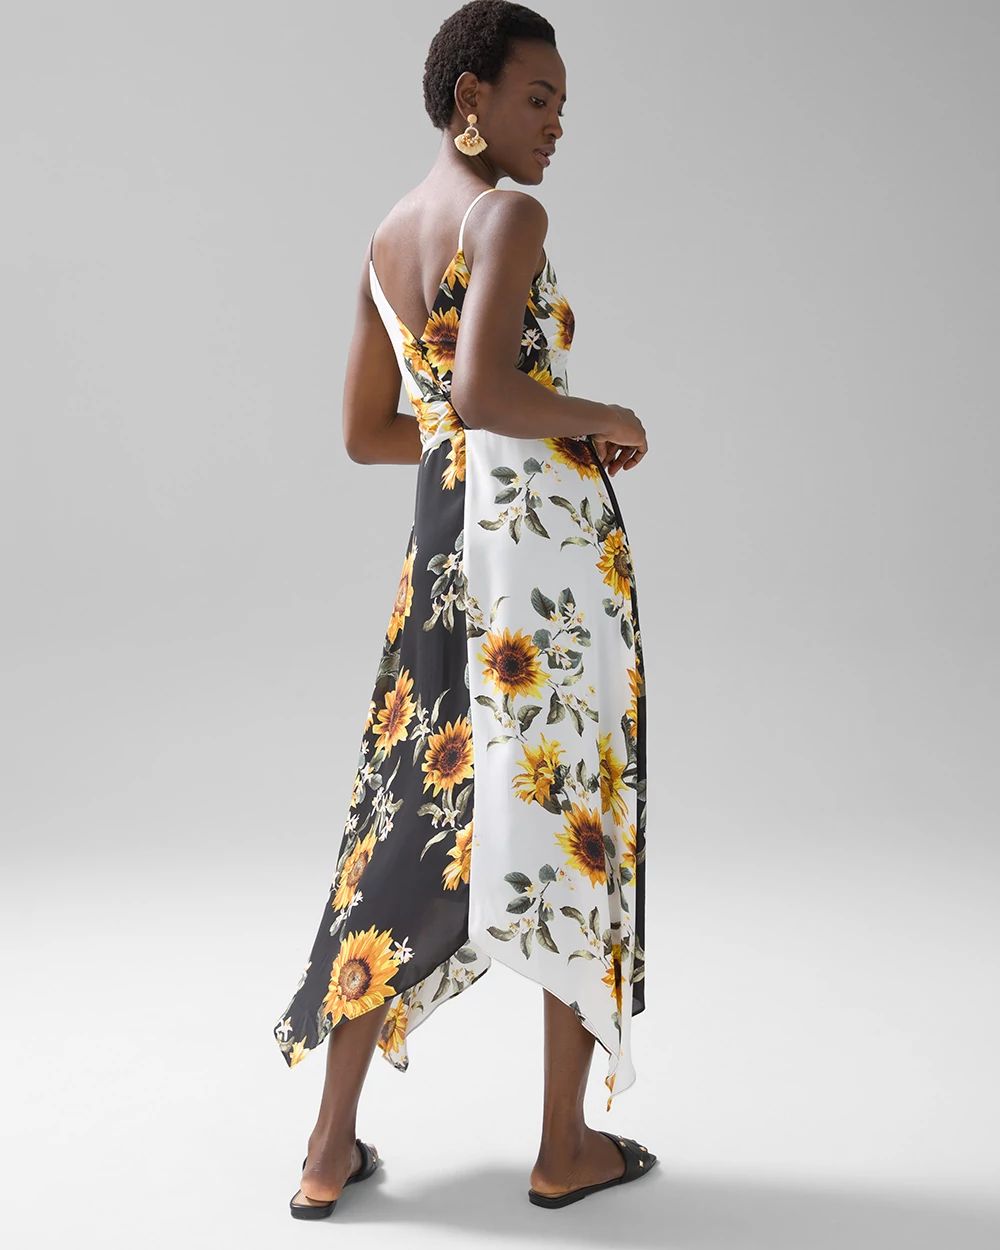 Sunflower Print Midi Dress click to view larger image.